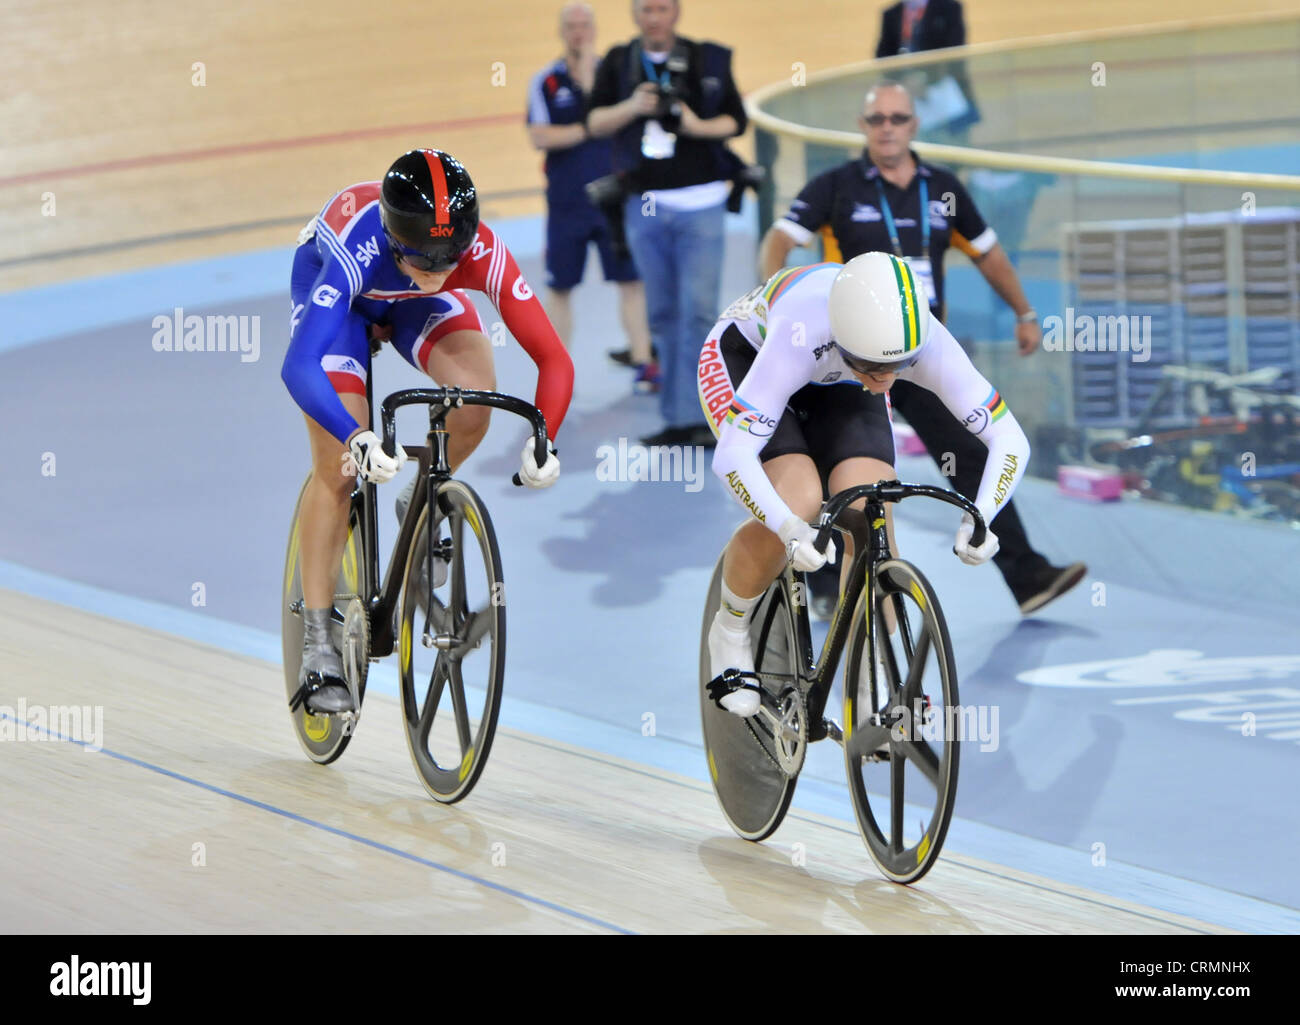 Victoria Pendleton MBE and Anna Meares in the Women's Sprint at the UCI Track Cycling World Cup, 2012 Olympic Velodrome, London. Stock Photo